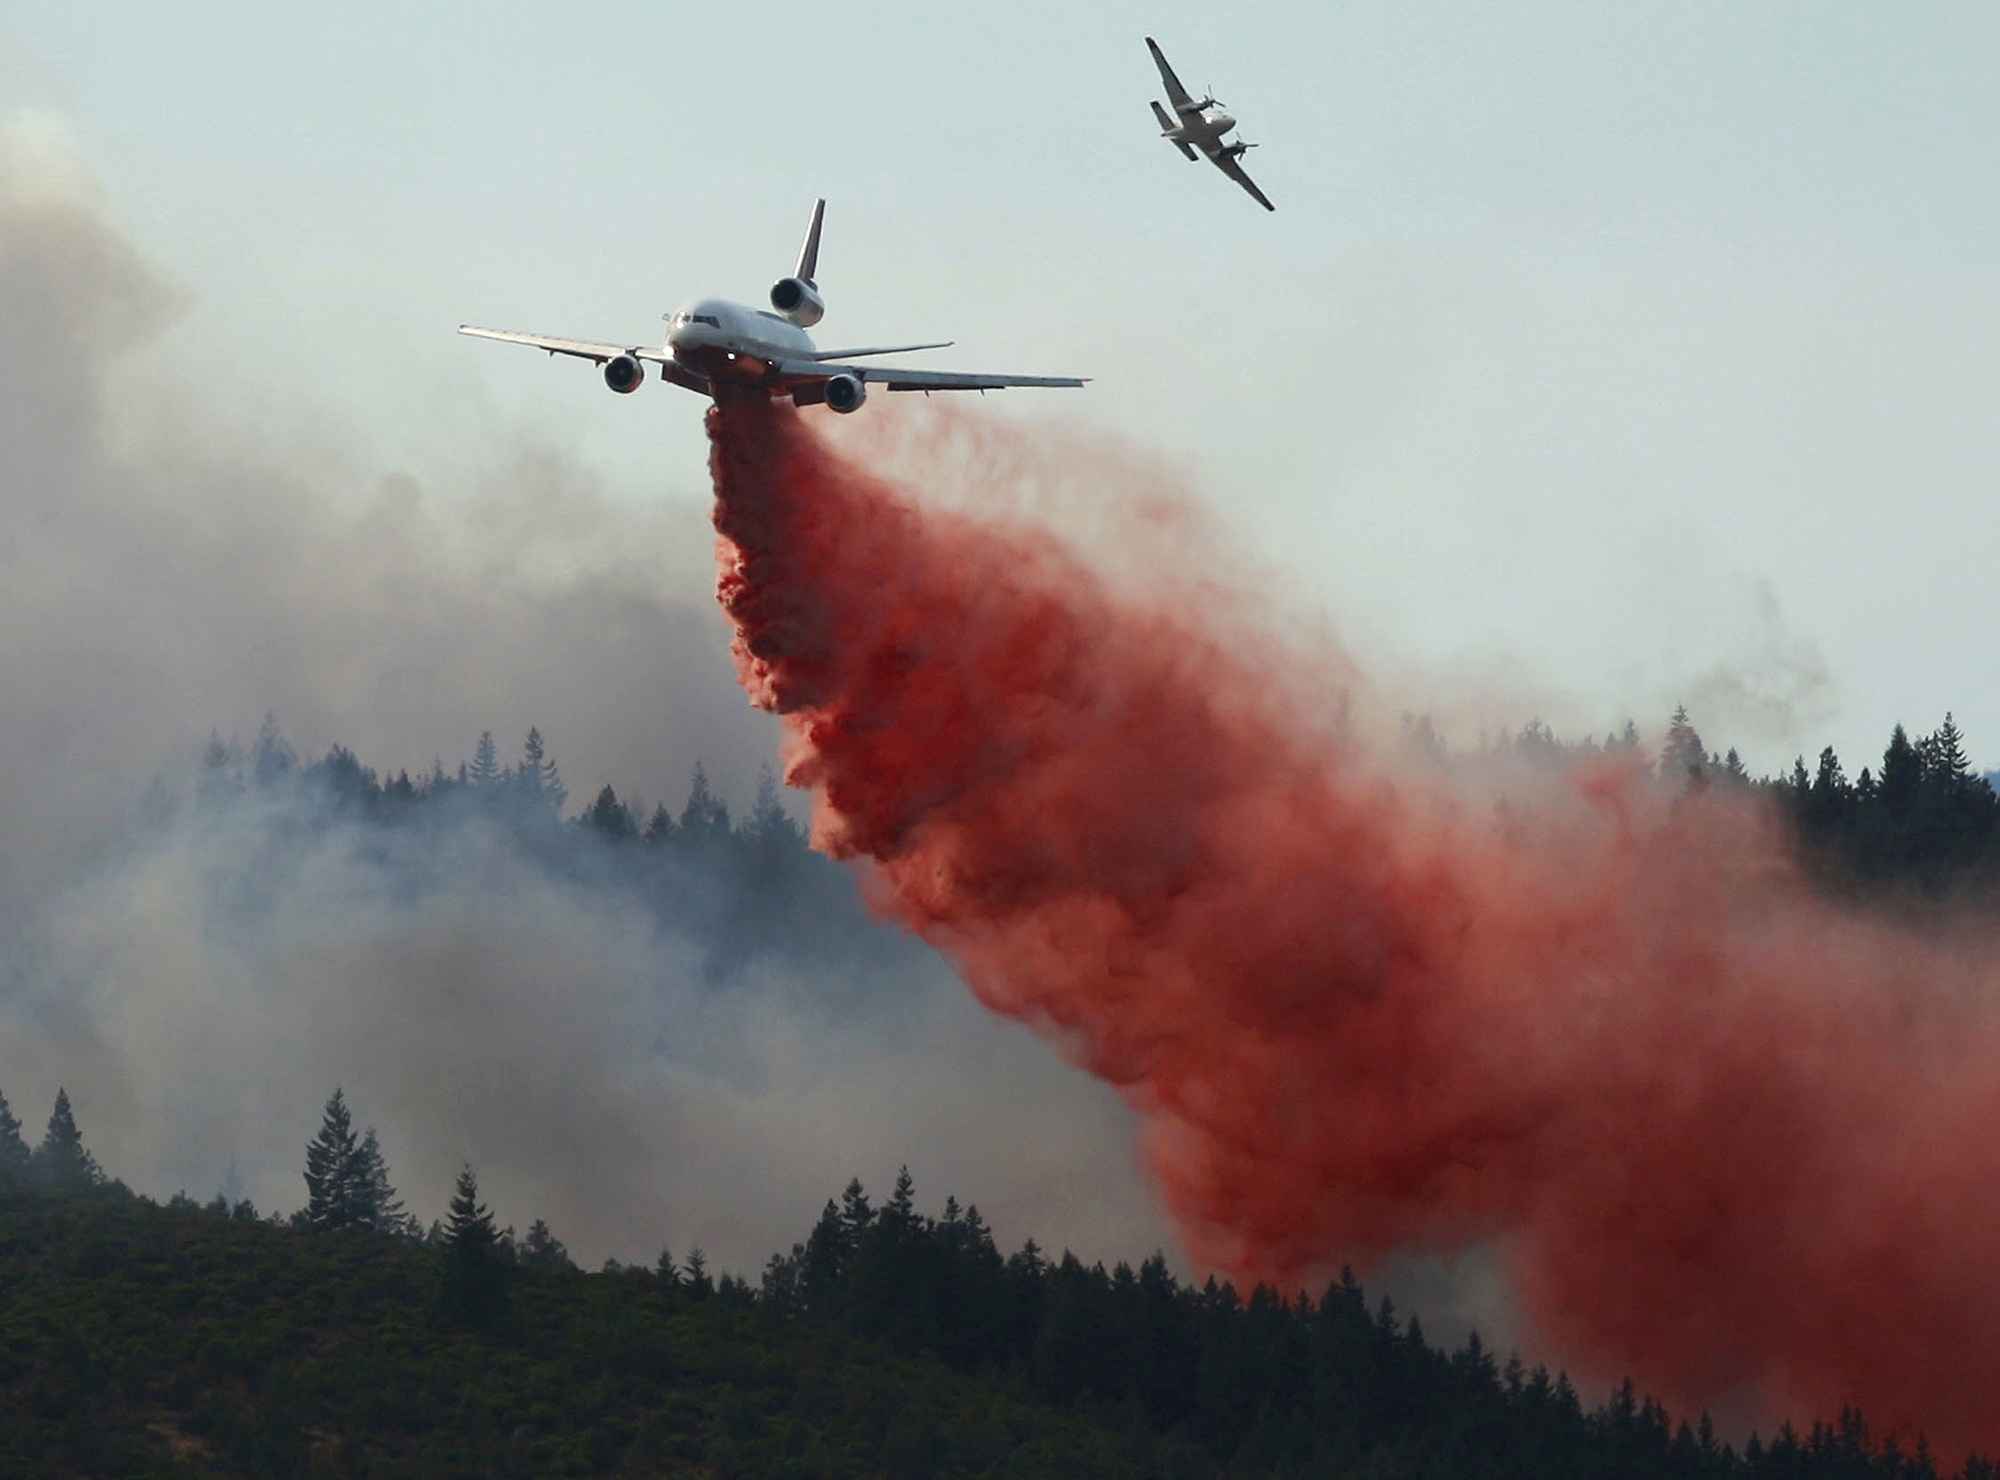 A DC-10 air tanker dropping fire retardant on the Powerline Fire in 2011 near Warm Springs, Ore.